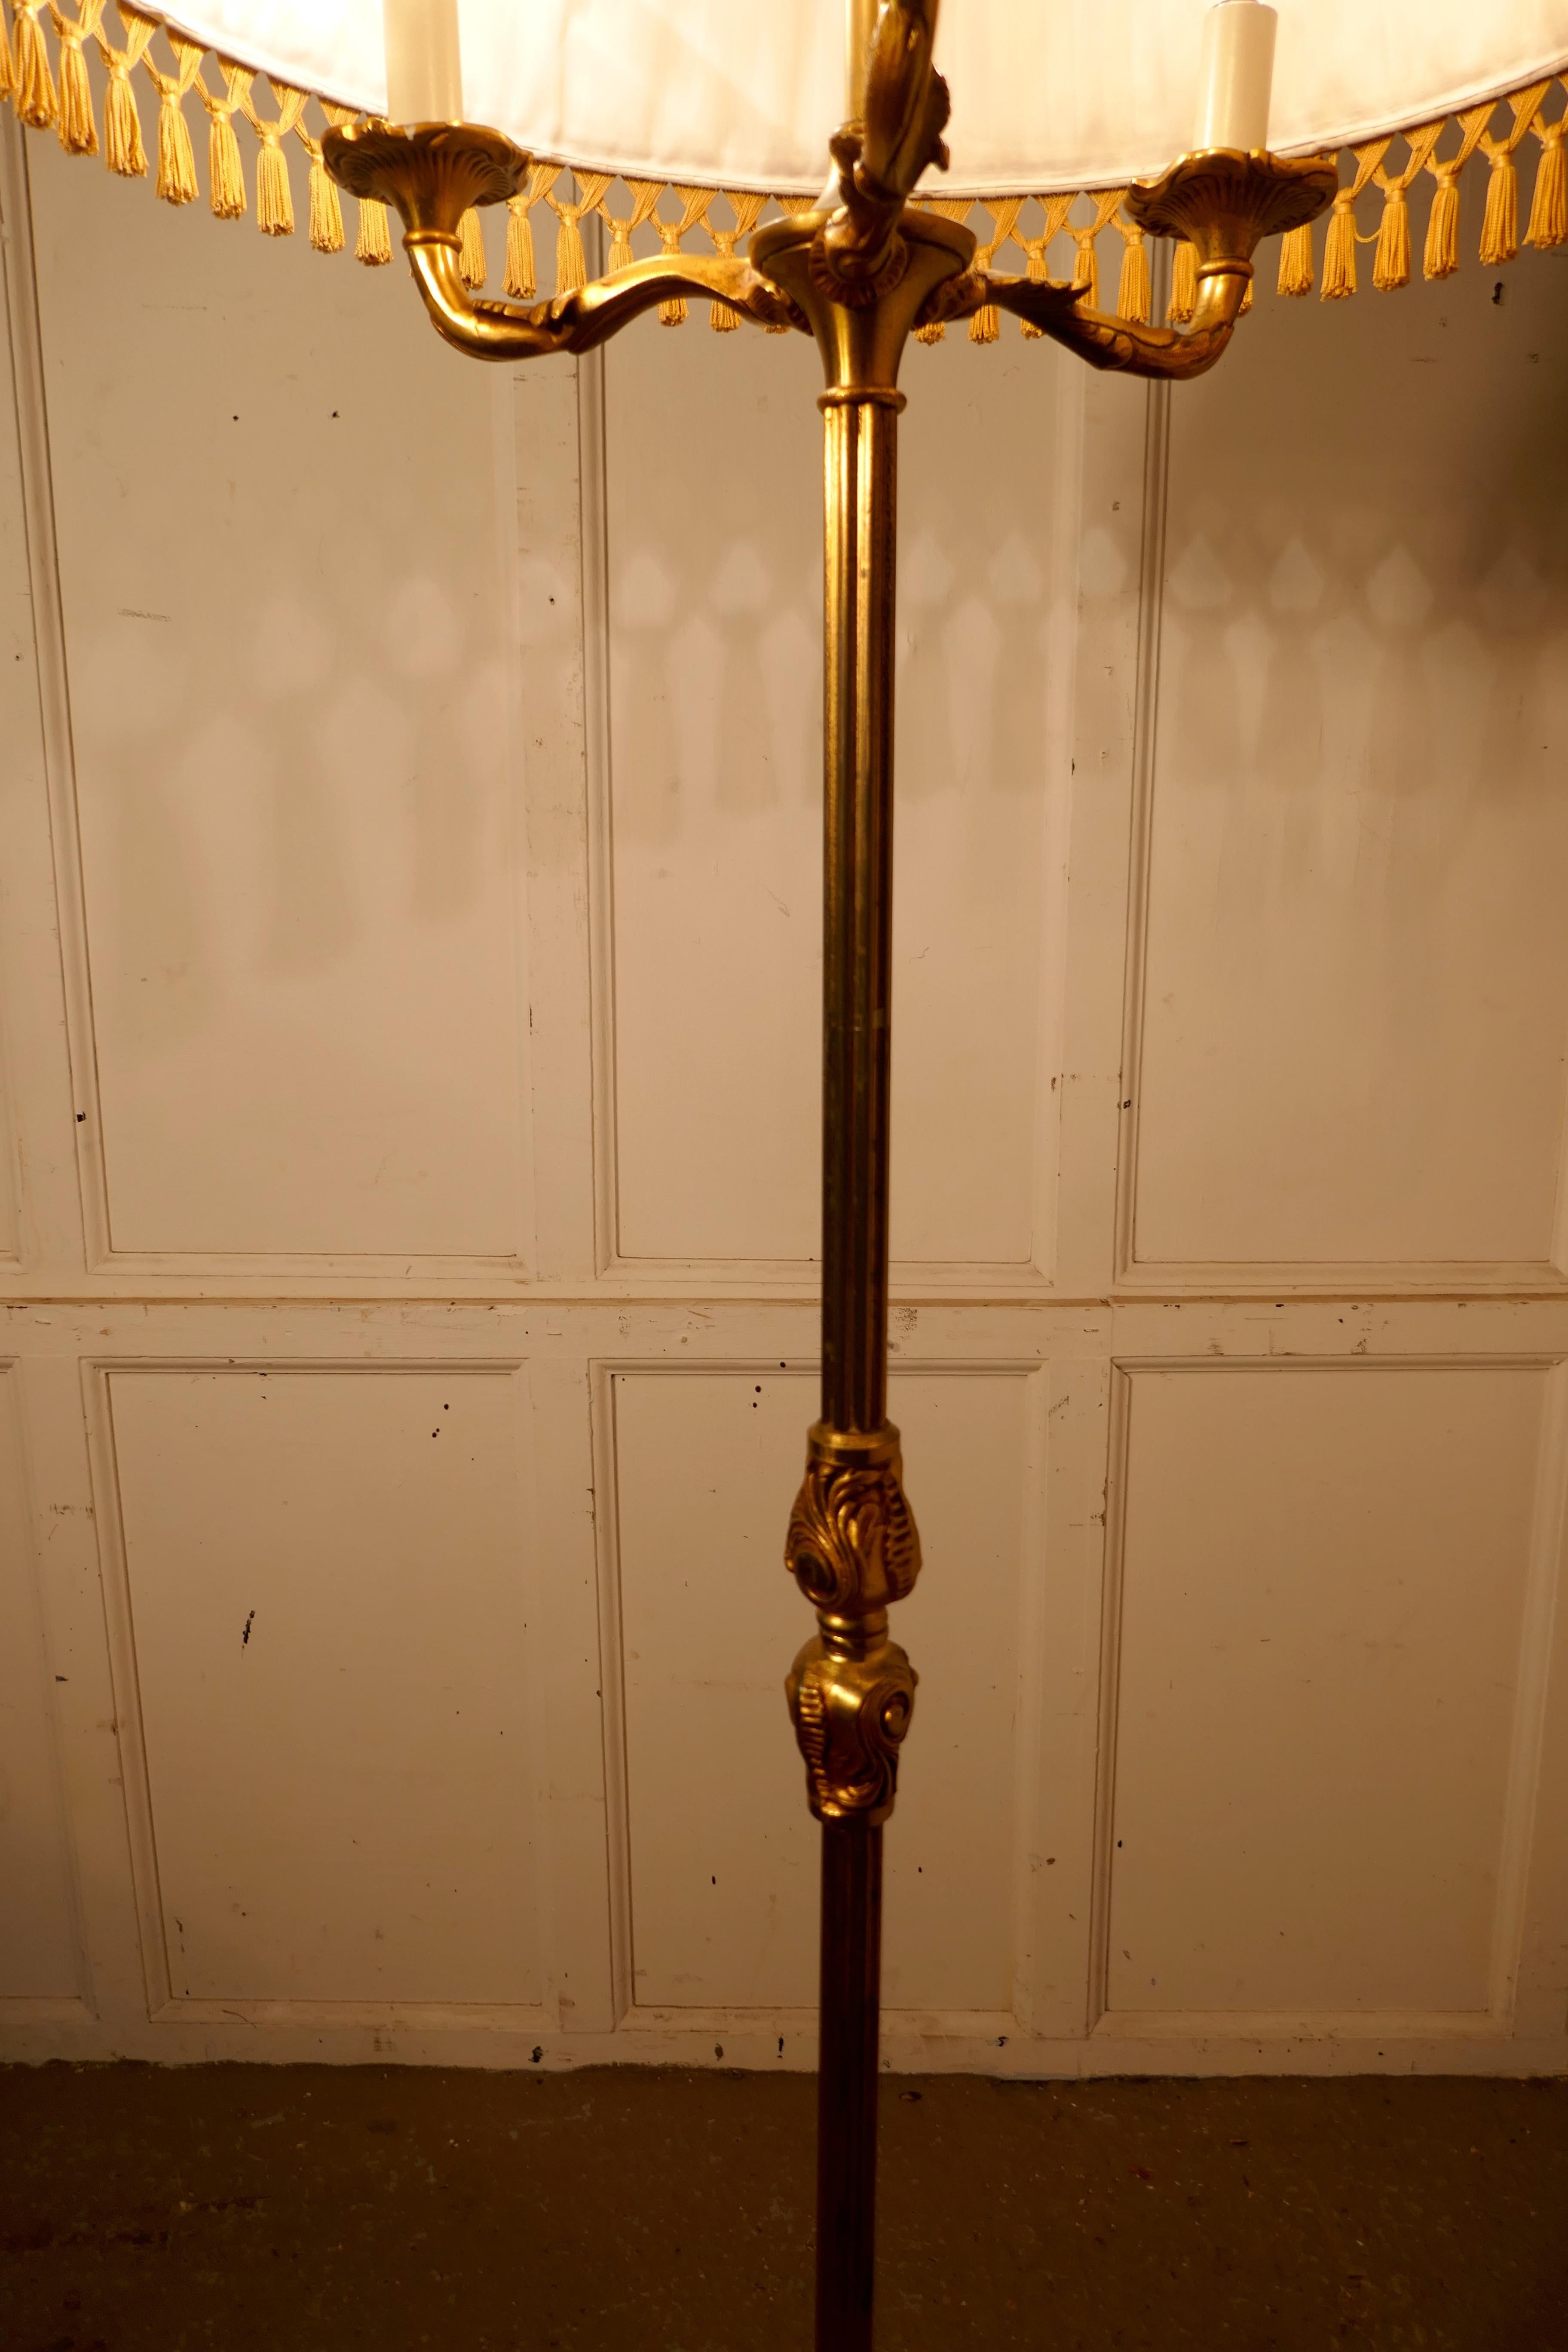 Early 20th Century French Brass Arts & Crafts Floor Lamp, Regency Style Standard Lamp